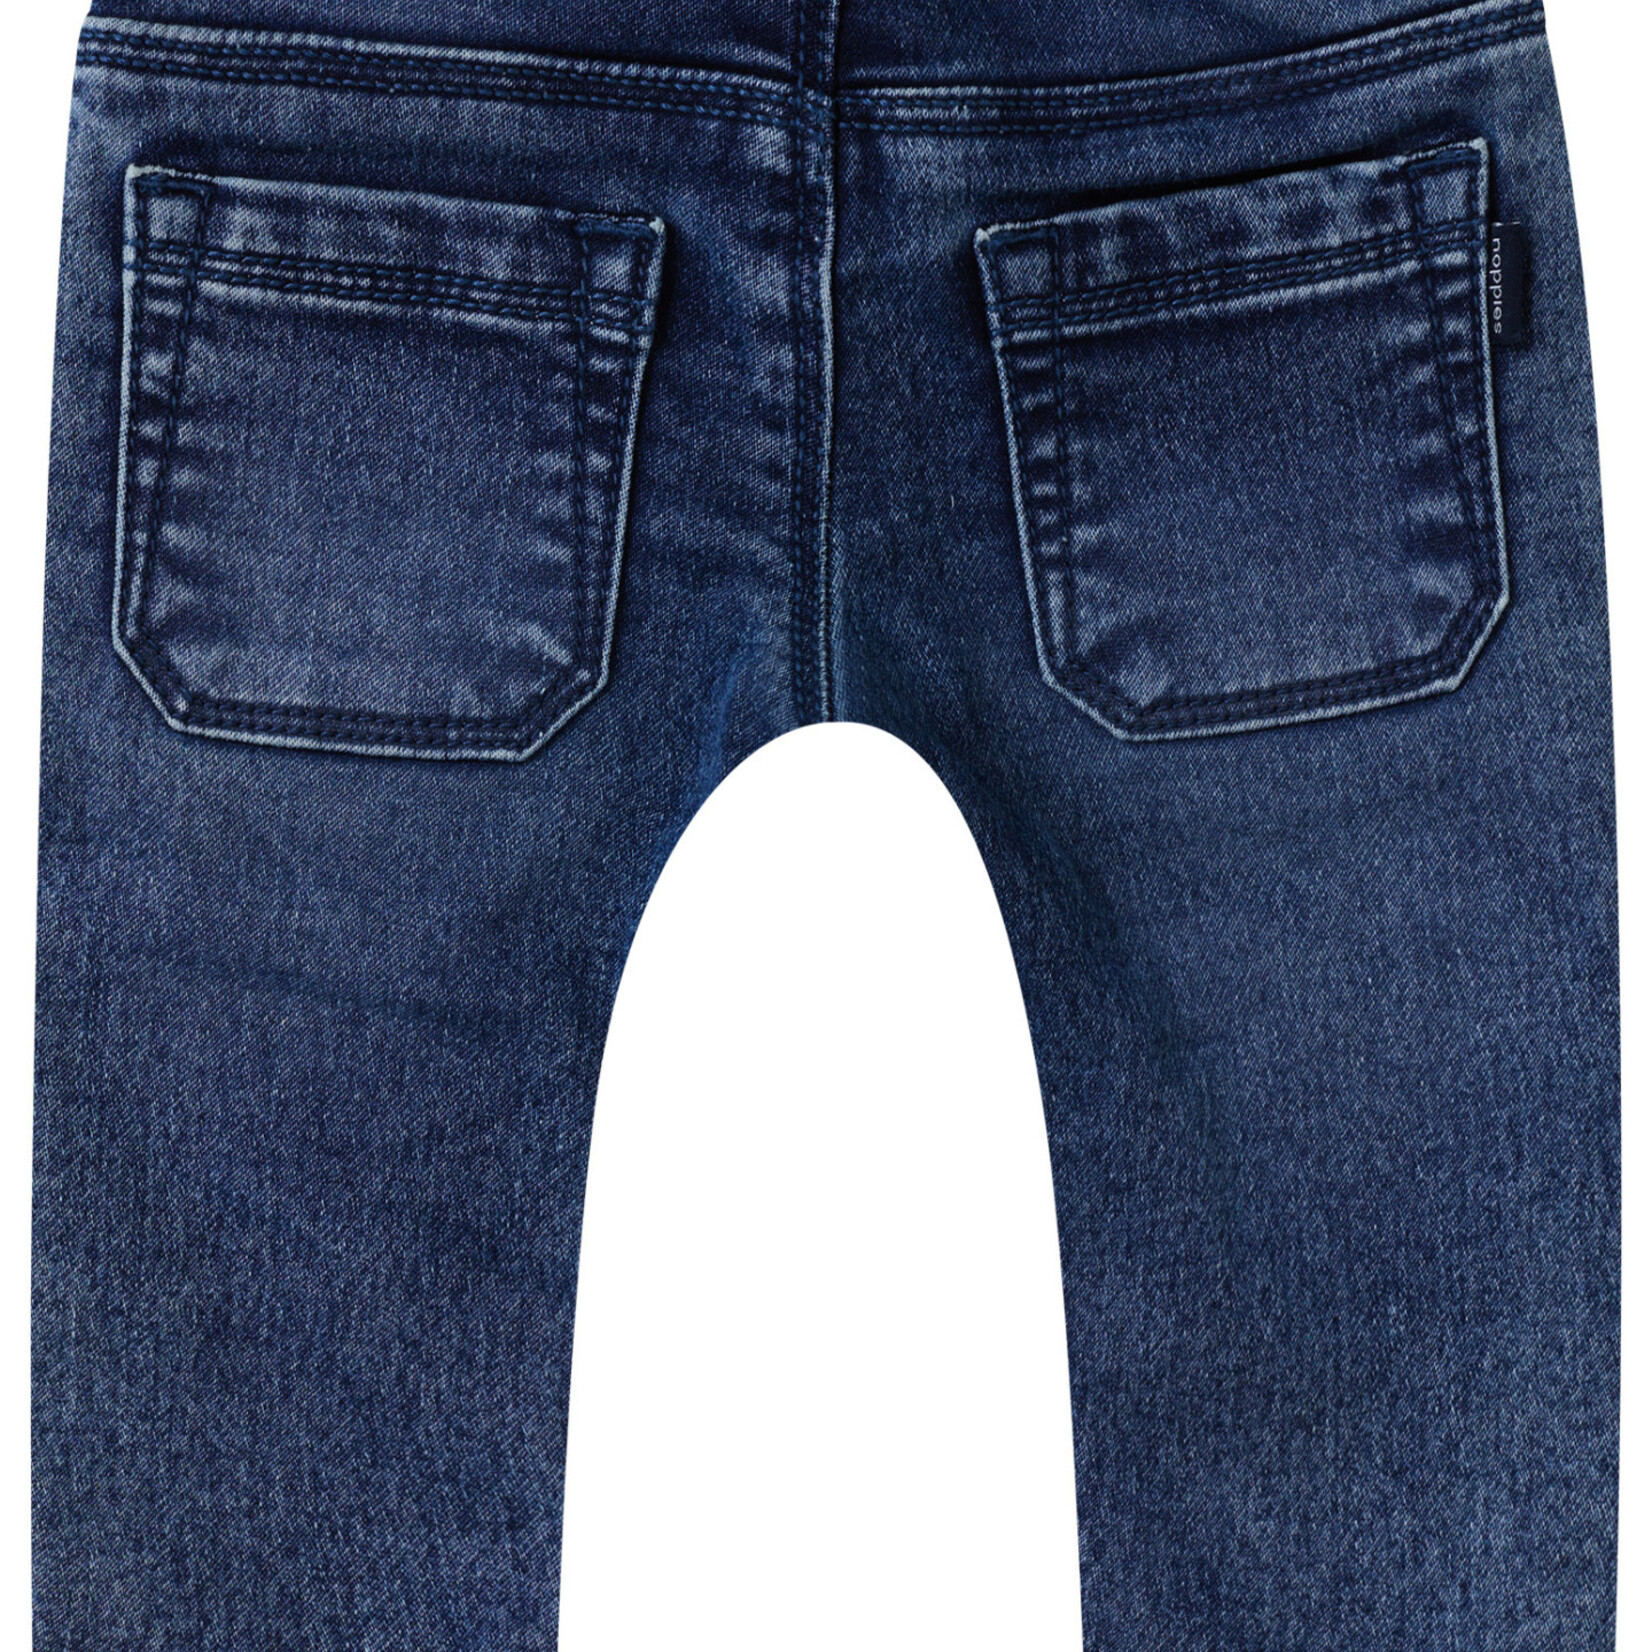 Noppies Boys denim pants Tower relaxed fit